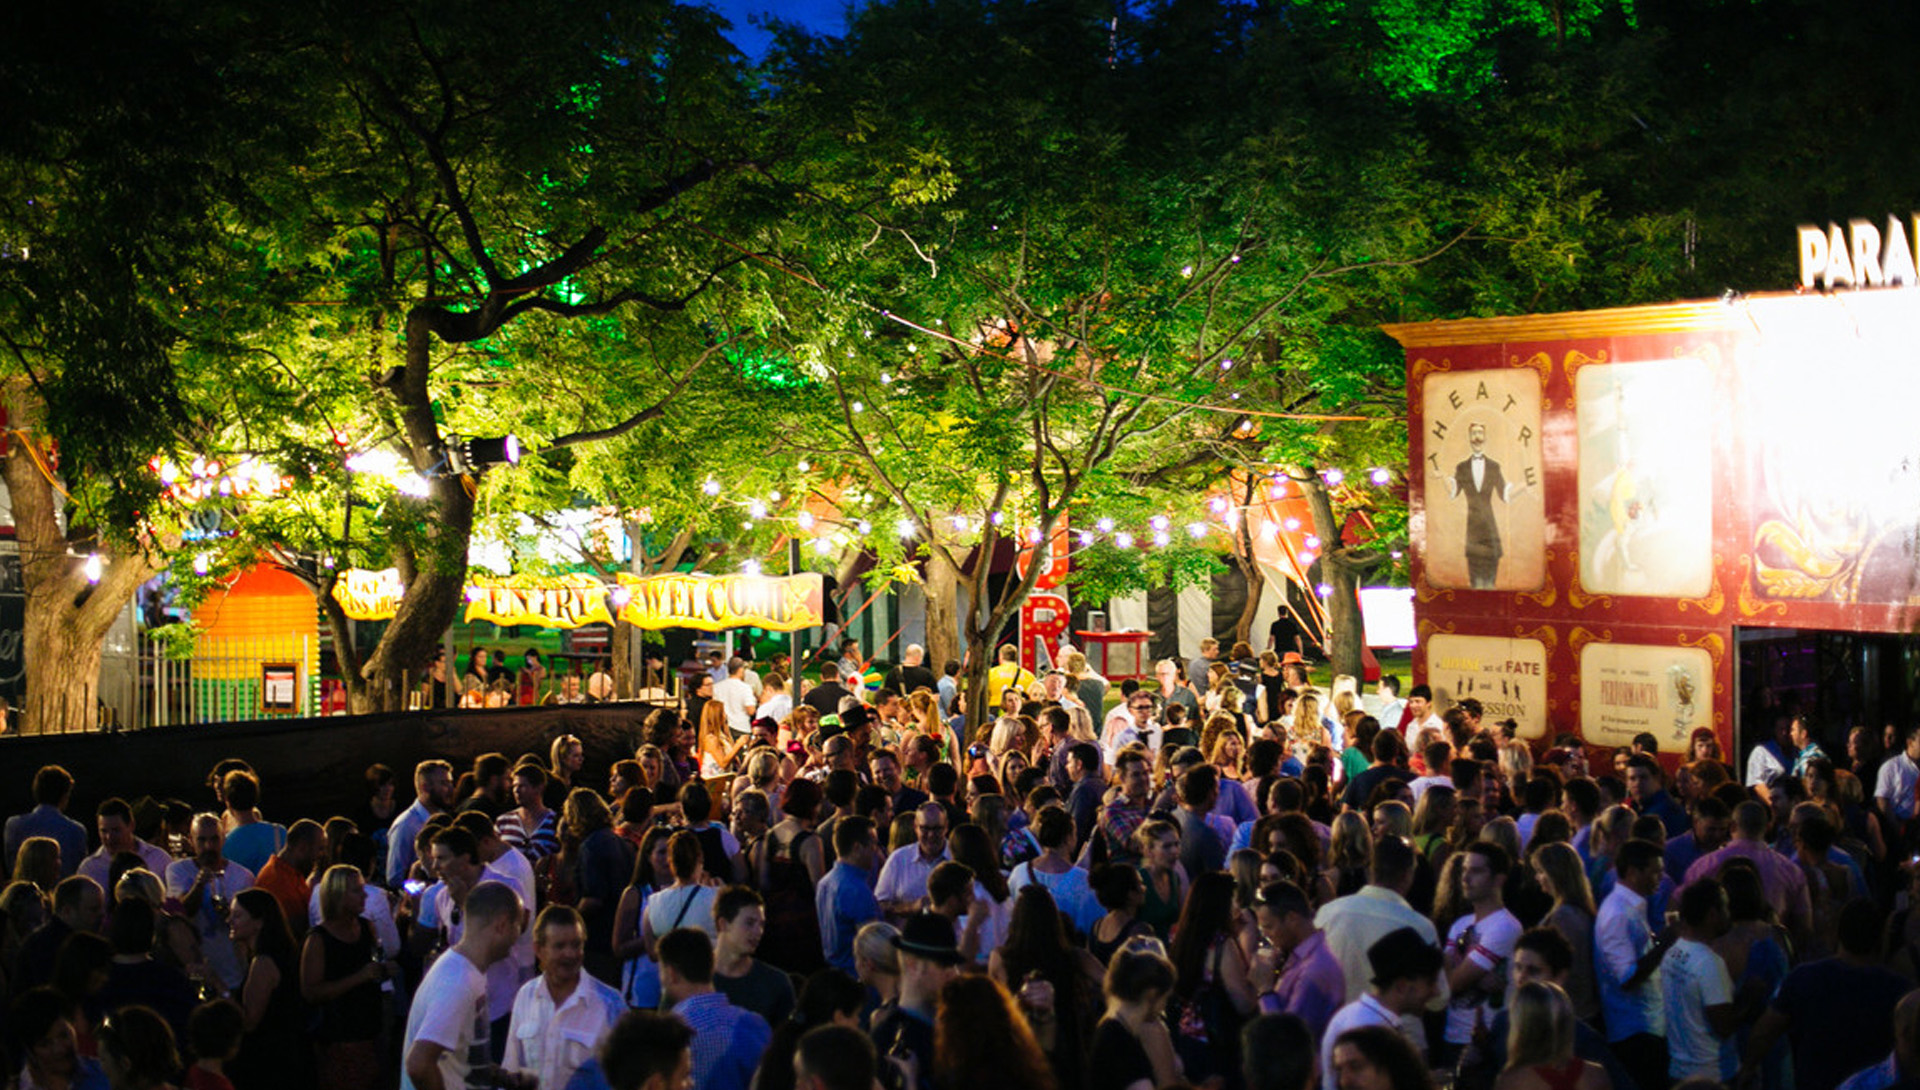 Adelaide Fringe has doubled its money since 2011, delivering extra $24.3m to South Australia